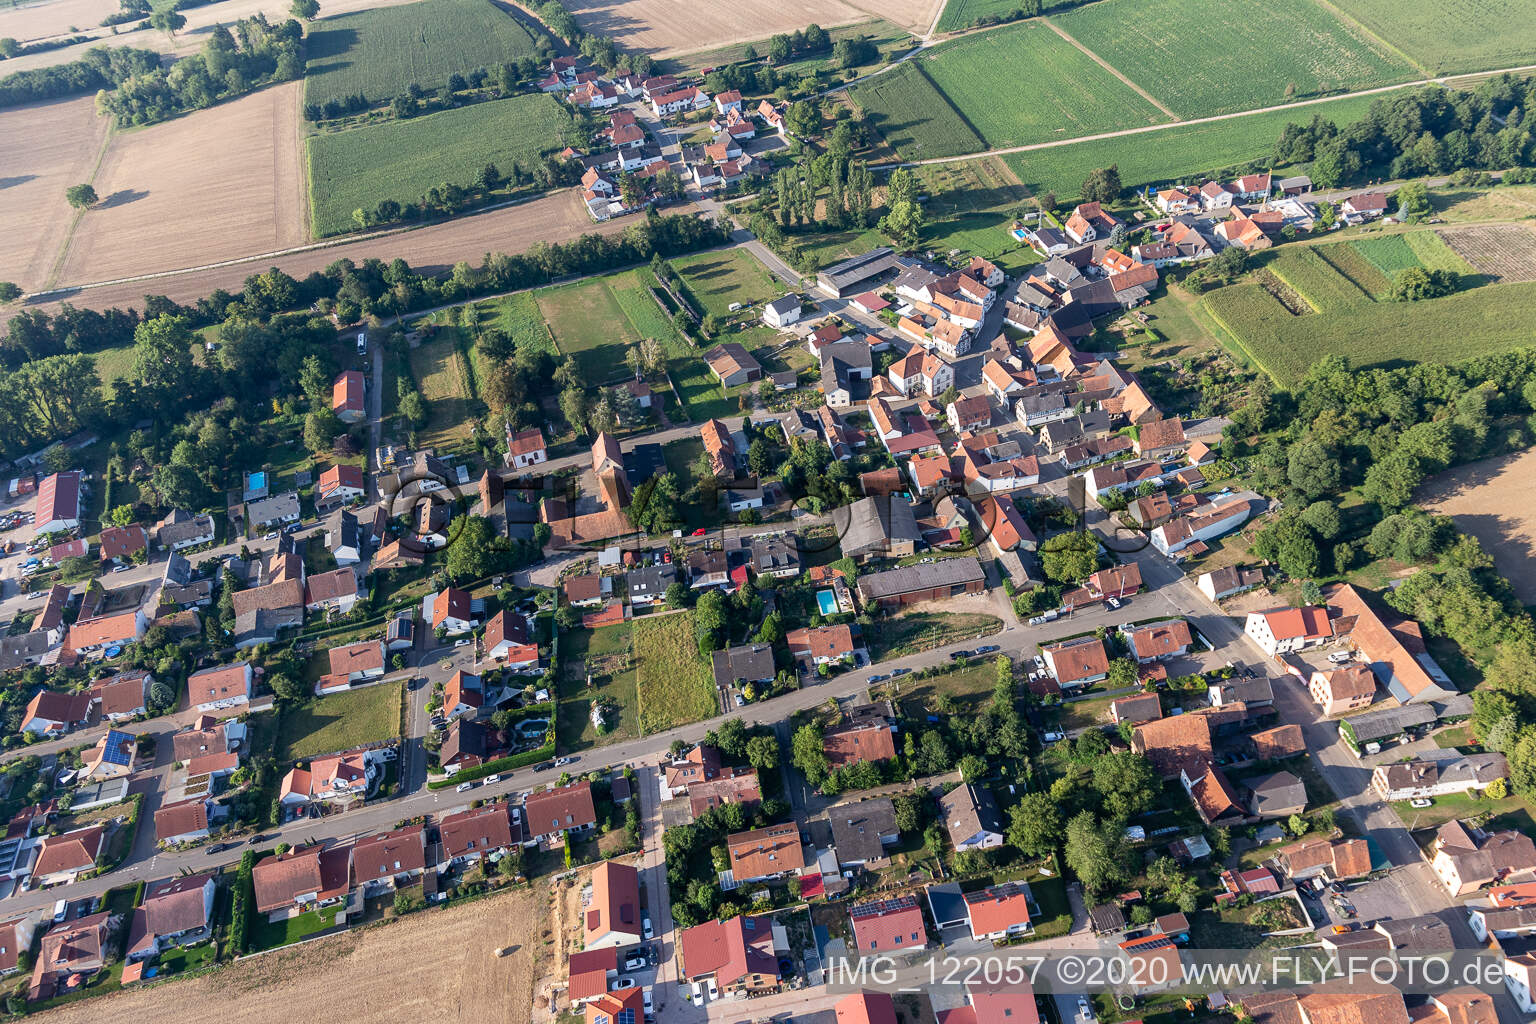 Drone image of Niederotterbach in the state Rhineland-Palatinate, Germany